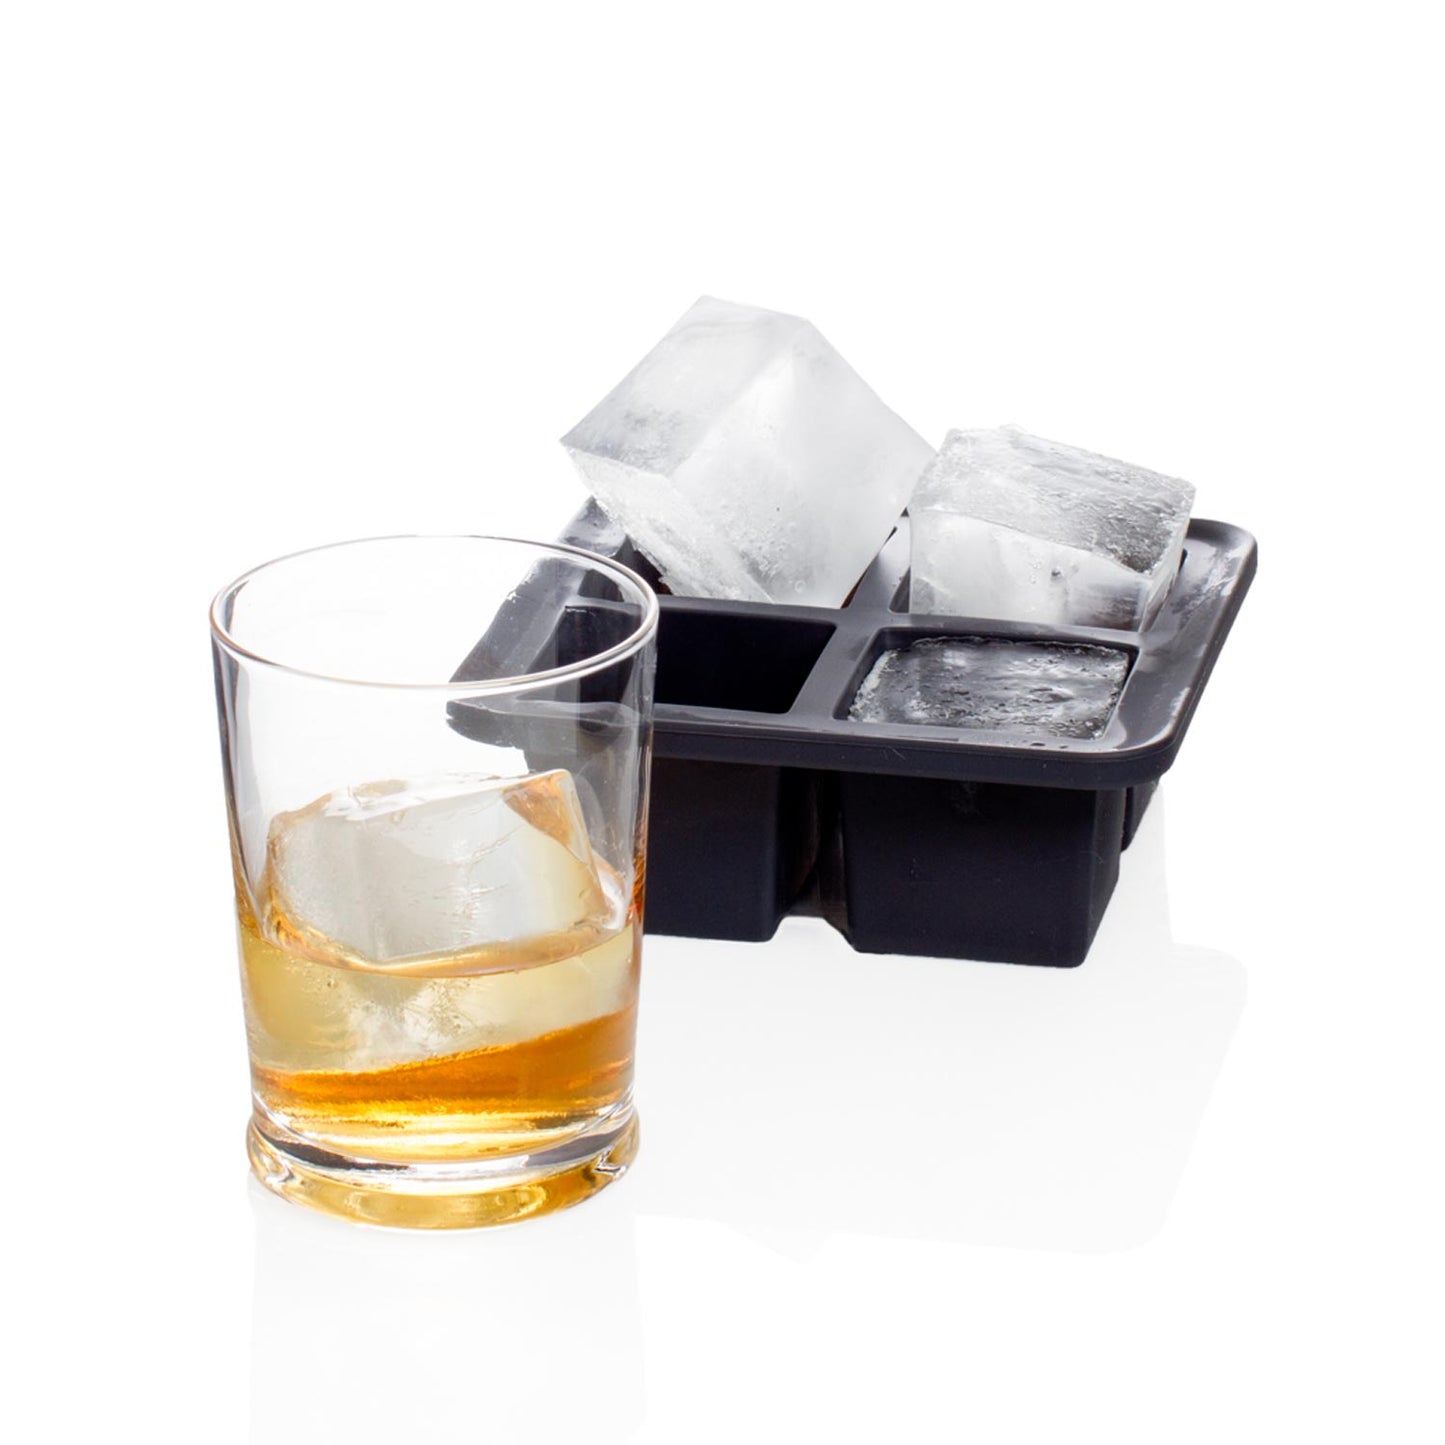 https://hudsongracesf.com/cdn/shop/products/Ice-Cube-Tray-with-Drink.jpg?v=1600721604&width=1445